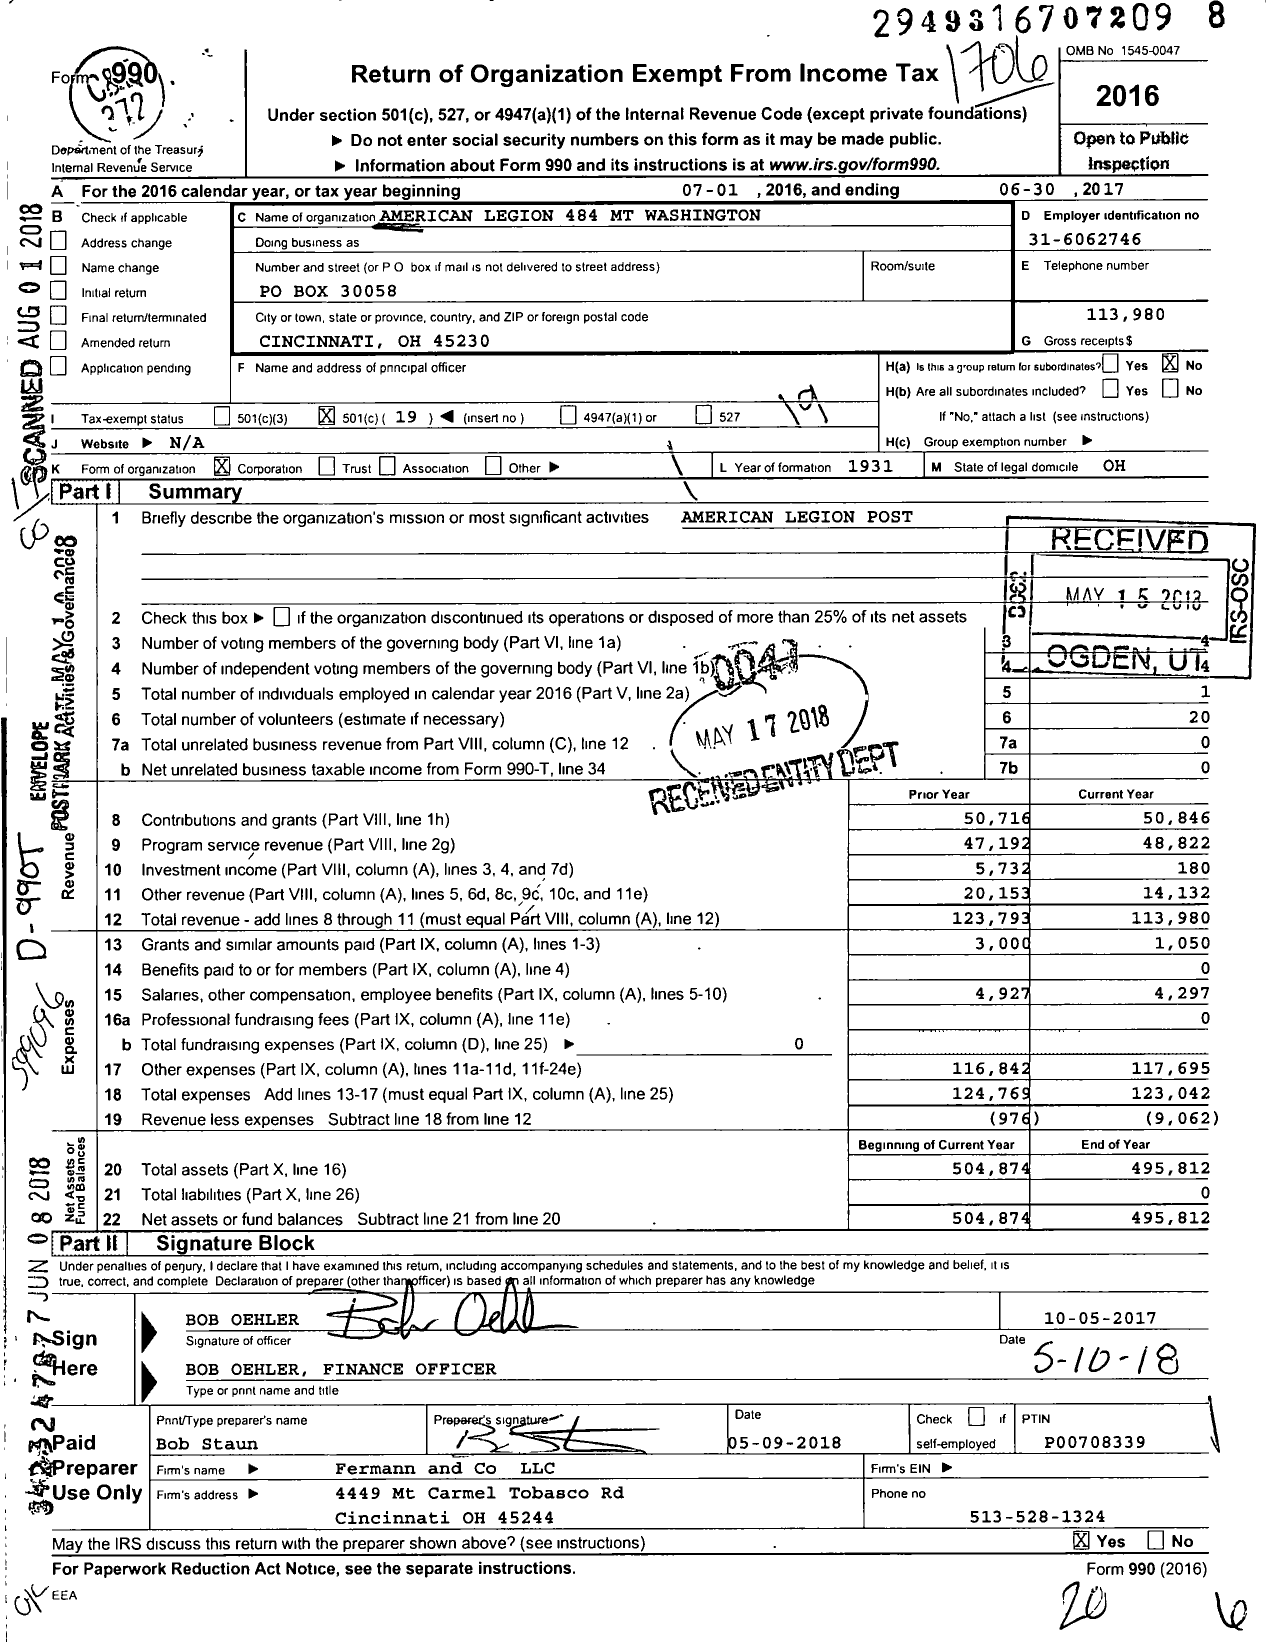 Image of first page of 2016 Form 990O for American Legion 484 MT Washington